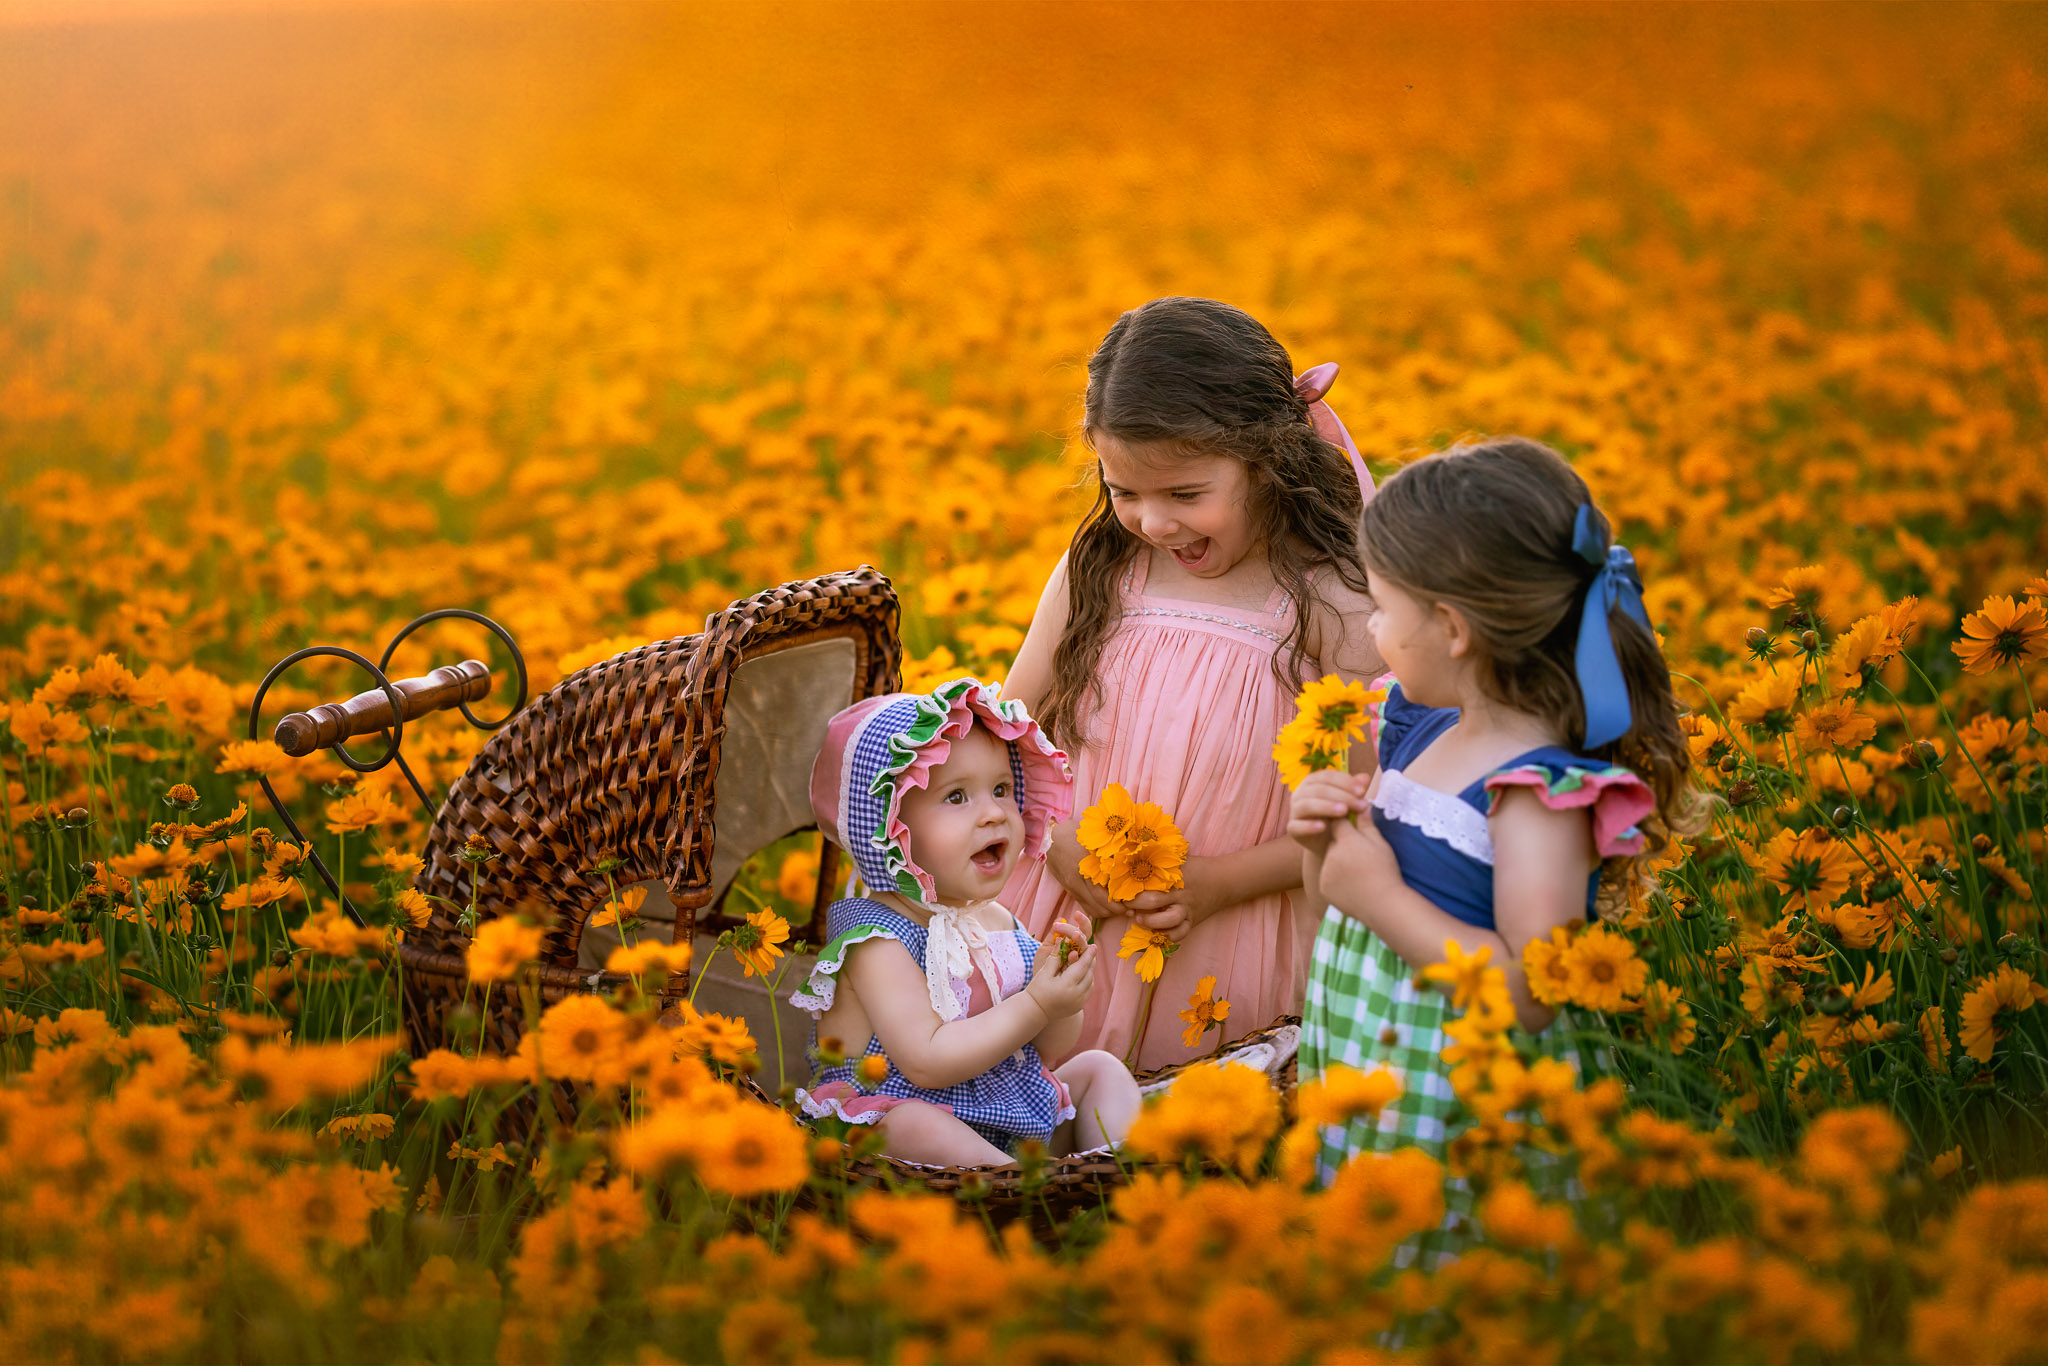 Two sisters pick flowers with their toddler baby sister sitting in a wicker carriage science safari